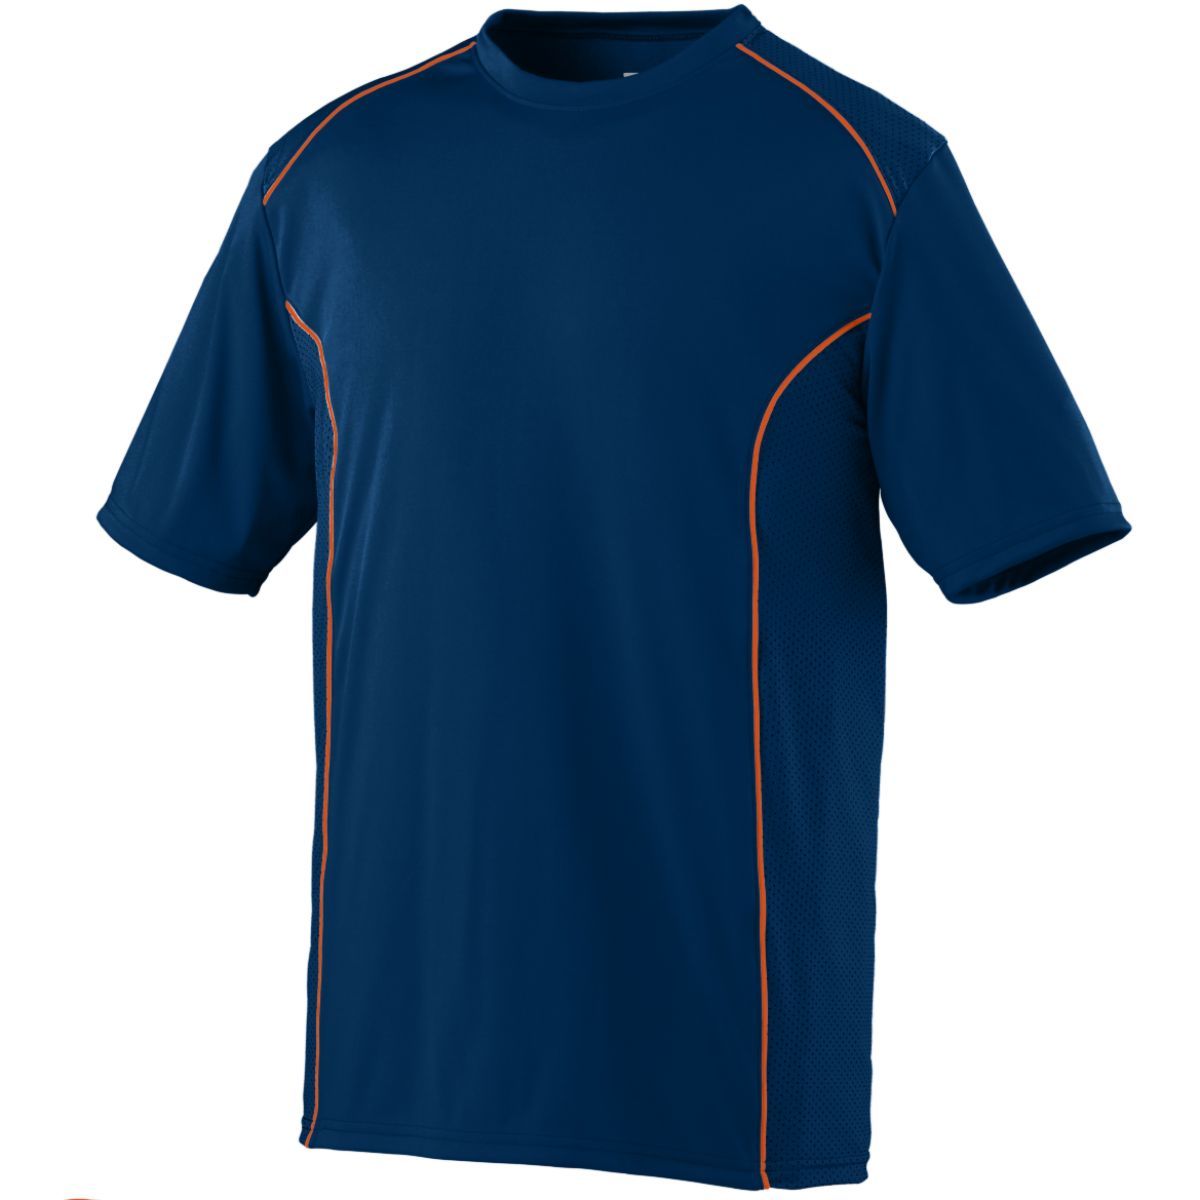 Augusta Sportswear Youth Winning Streak Crew in Navy/Orange  -Part of the Youth, Augusta-Products, Soccer, All-Sports-1 product lines at KanaleyCreations.com